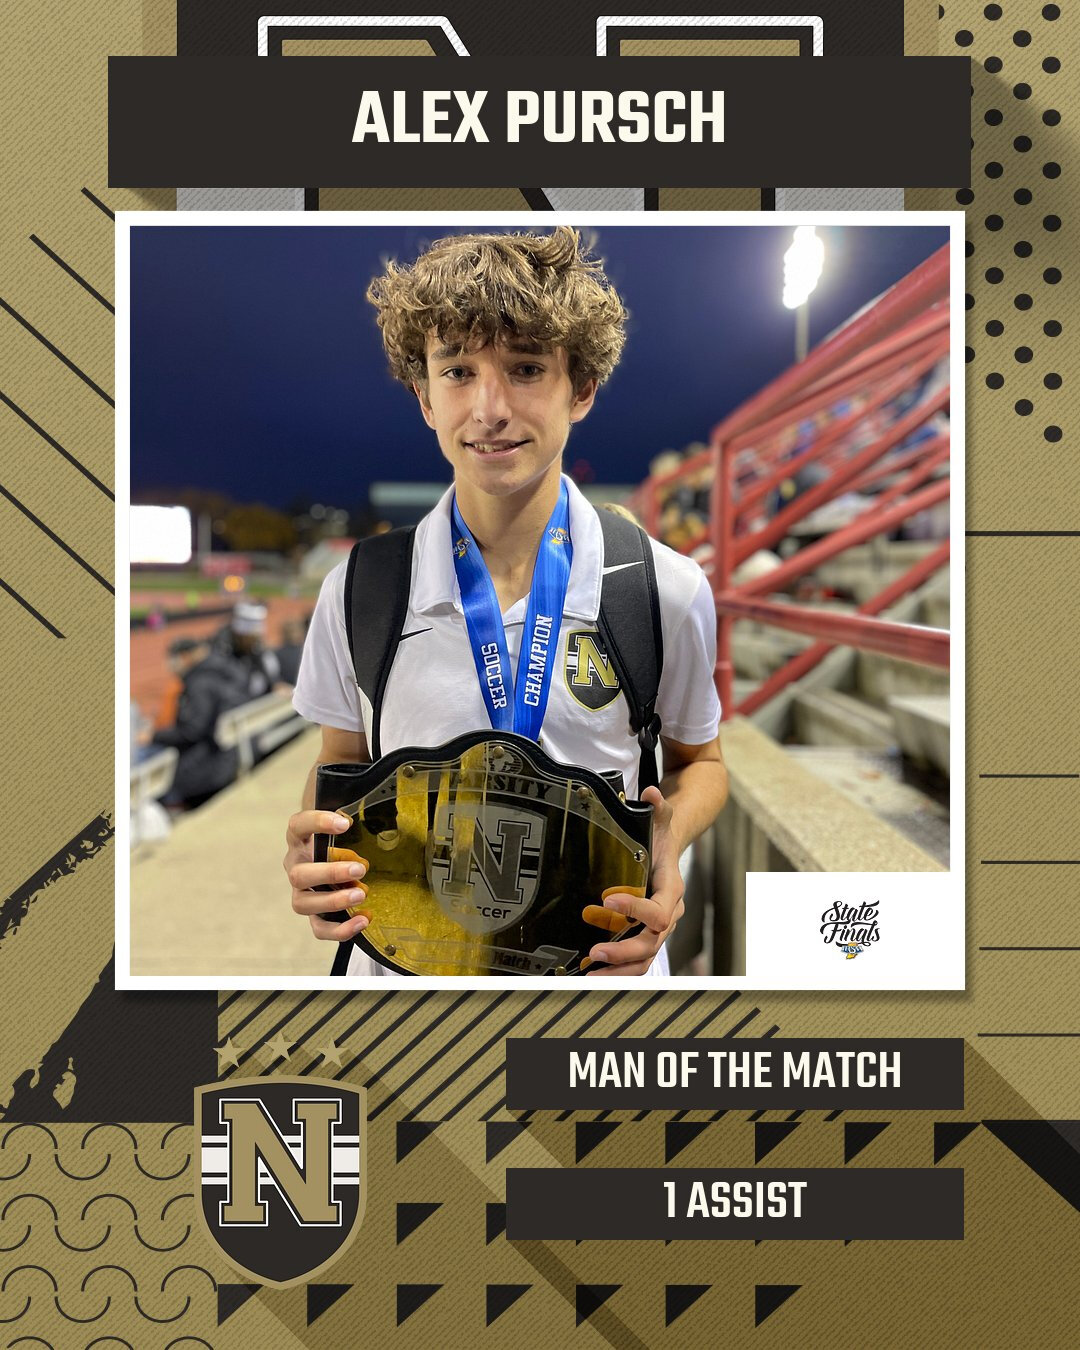 Alex Pursch is the final Man of the Match for the season for the State Championship win against Cathedral! Alex had an assist in the first goal for the Millers!
Alex's Favorite Pro Soccer Team: Liverpool
Alex's Favorite High School Soccer Memory: &qu